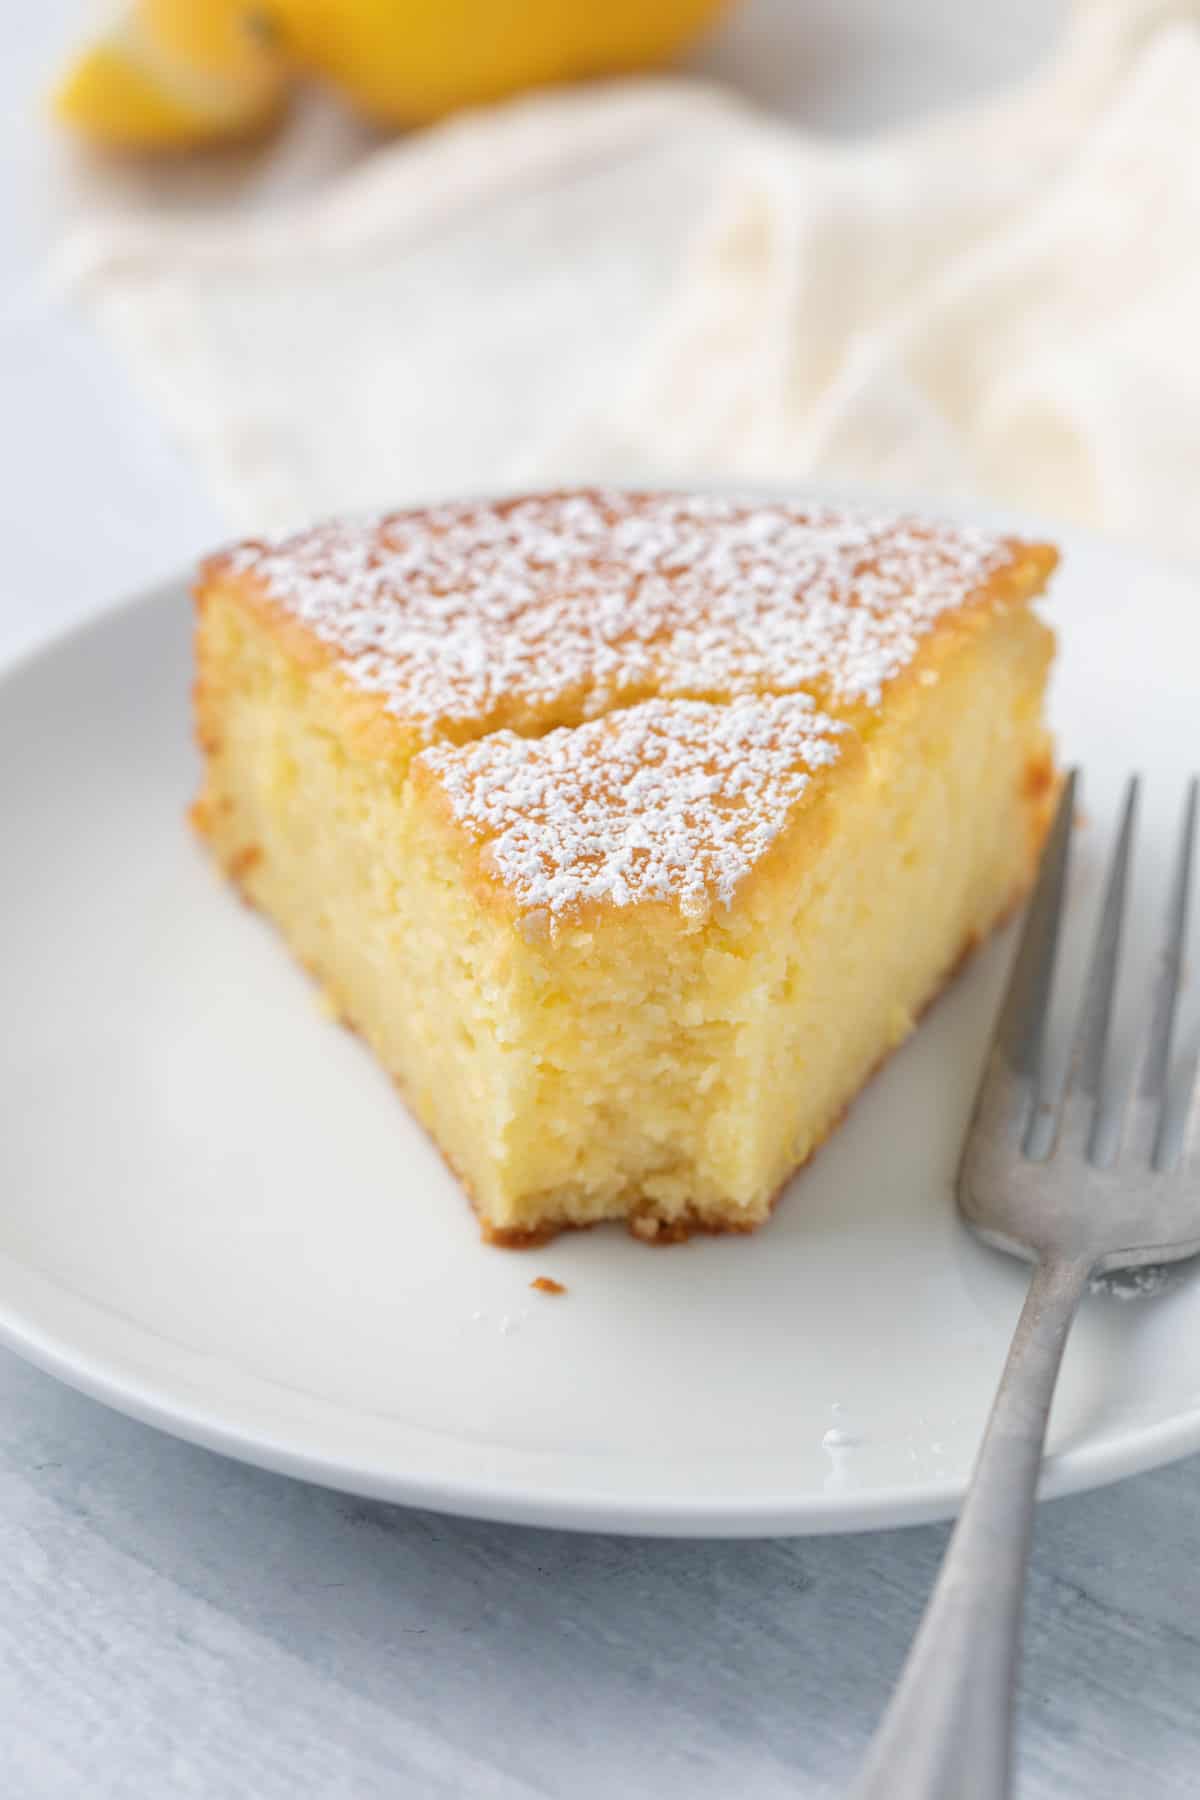 Straight on view of a slice of lemon ricotta cake with a bite taken out and fork resting on plate.